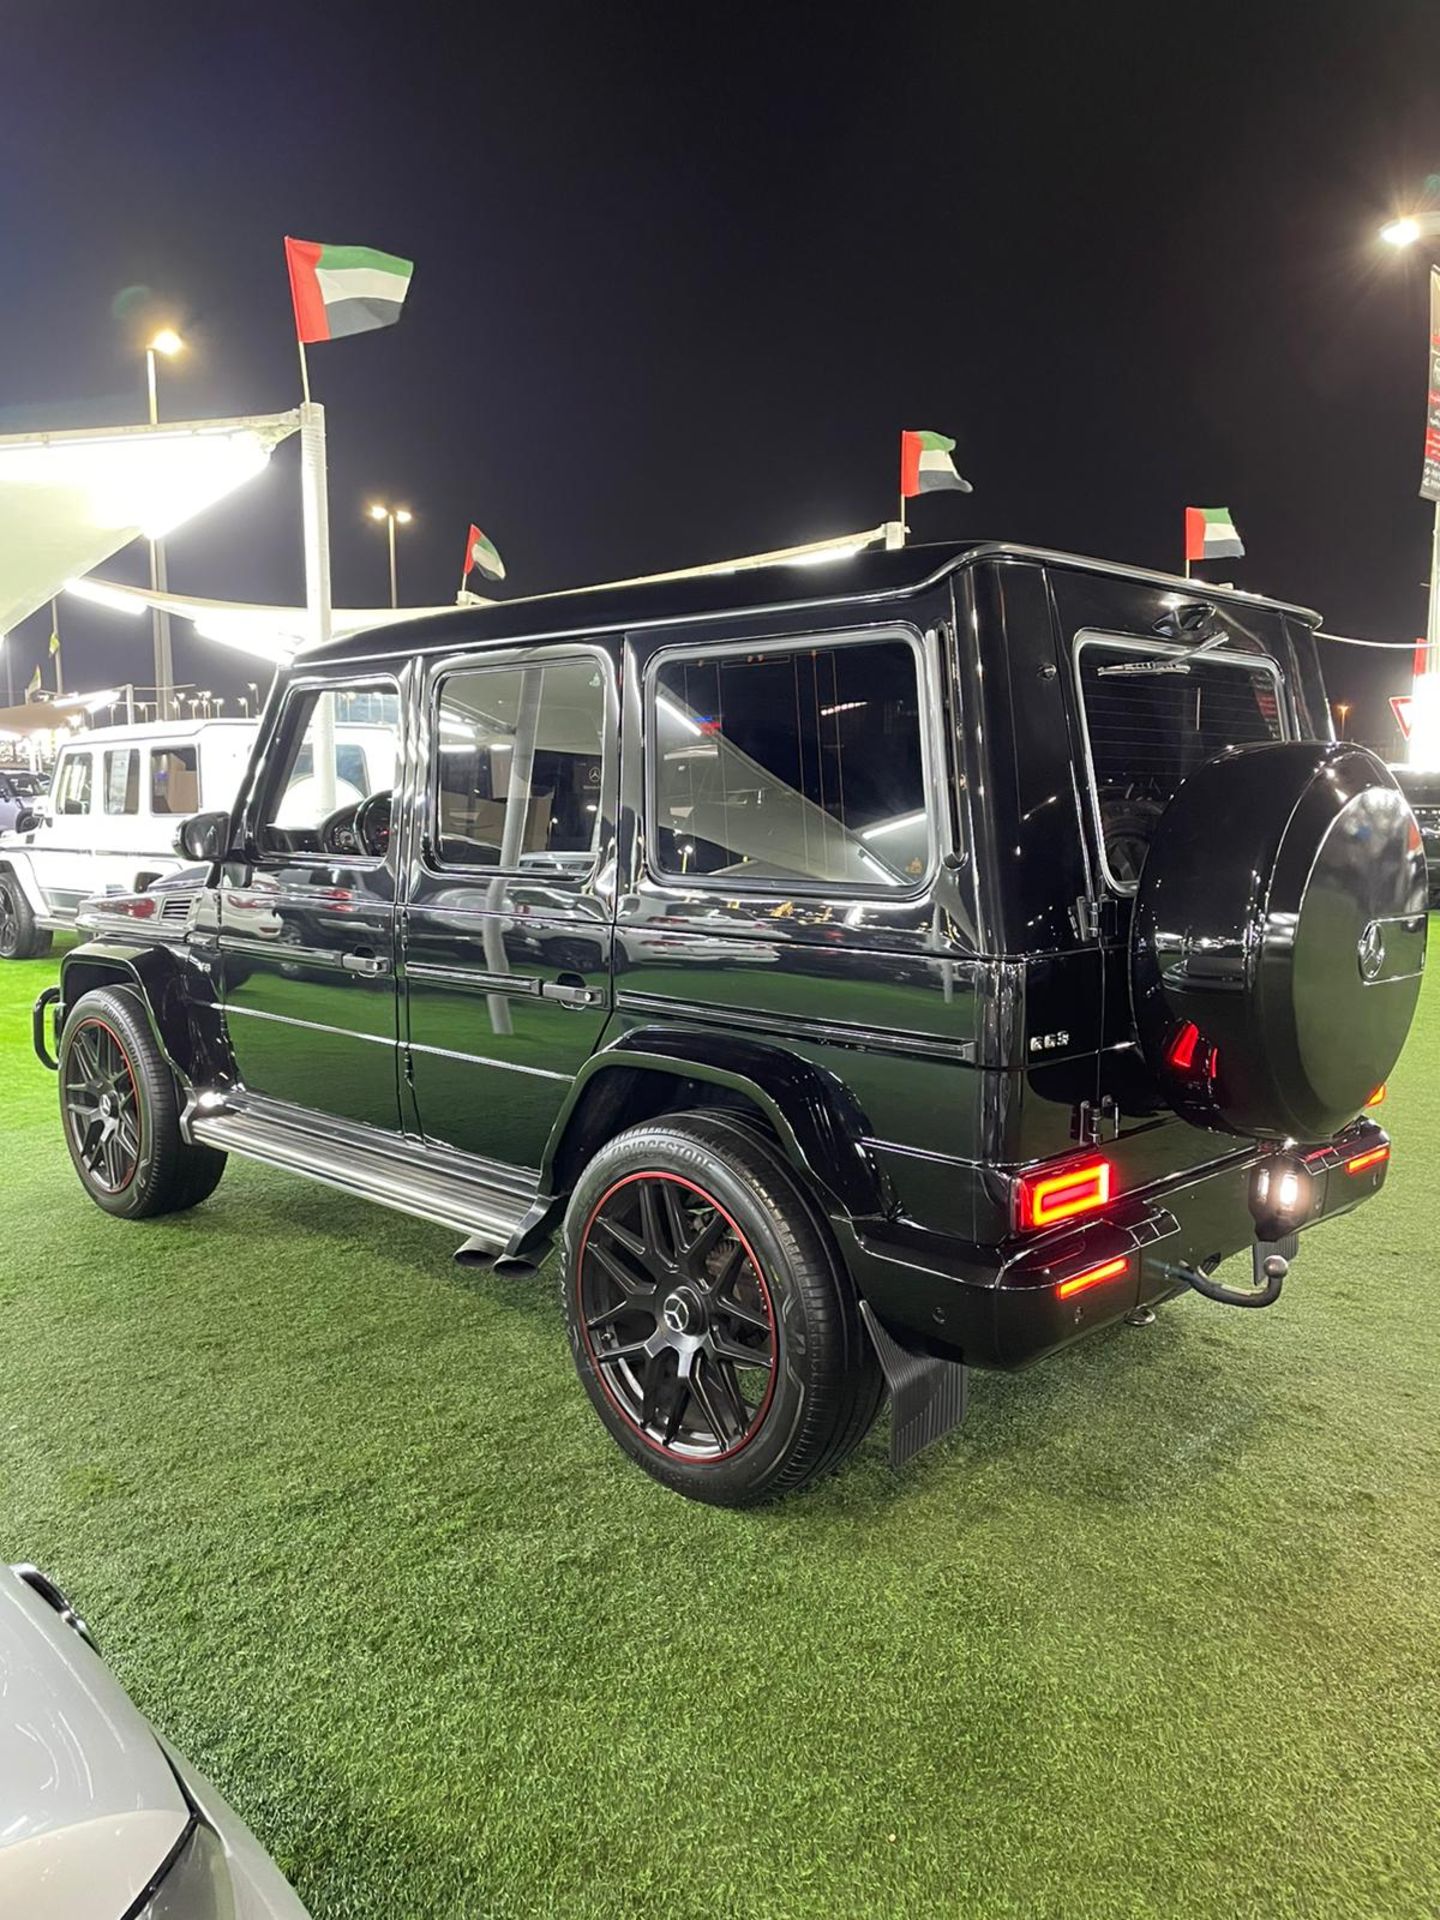 2011 MERCEDES G WAGON G55 changed to a 2020 G63 look Full outside exterior complete package !! - Image 17 of 36